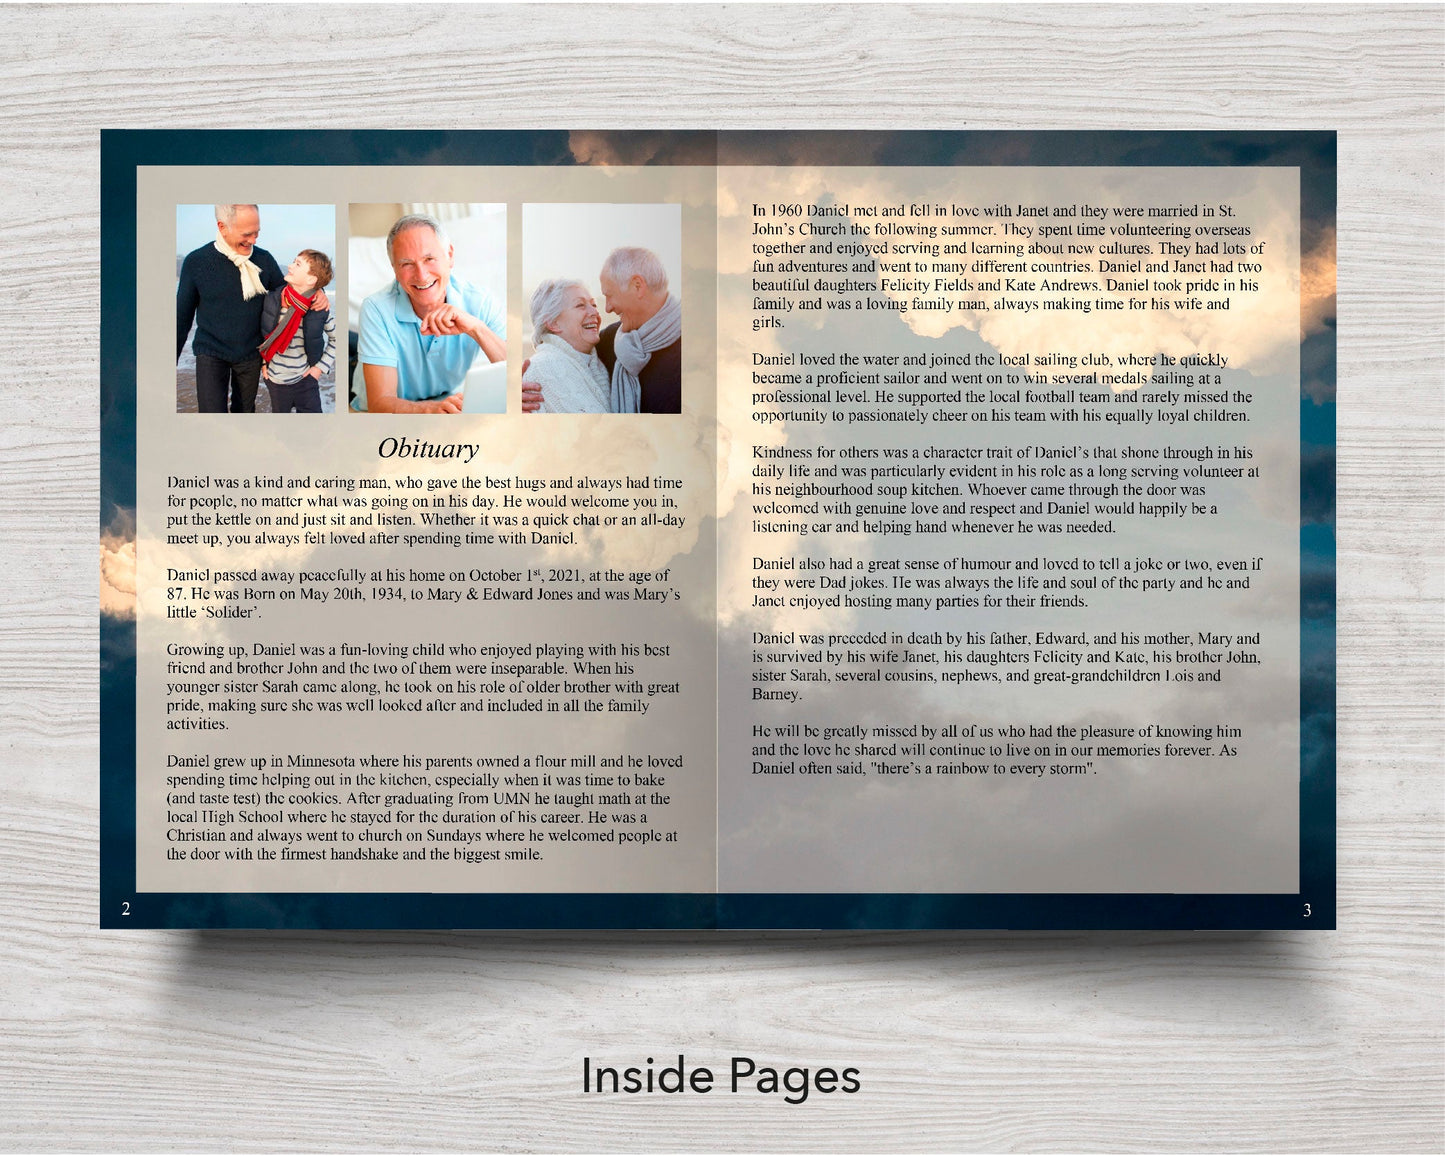 12 Page Sky Funeral Program Template (11 x 17 inches)